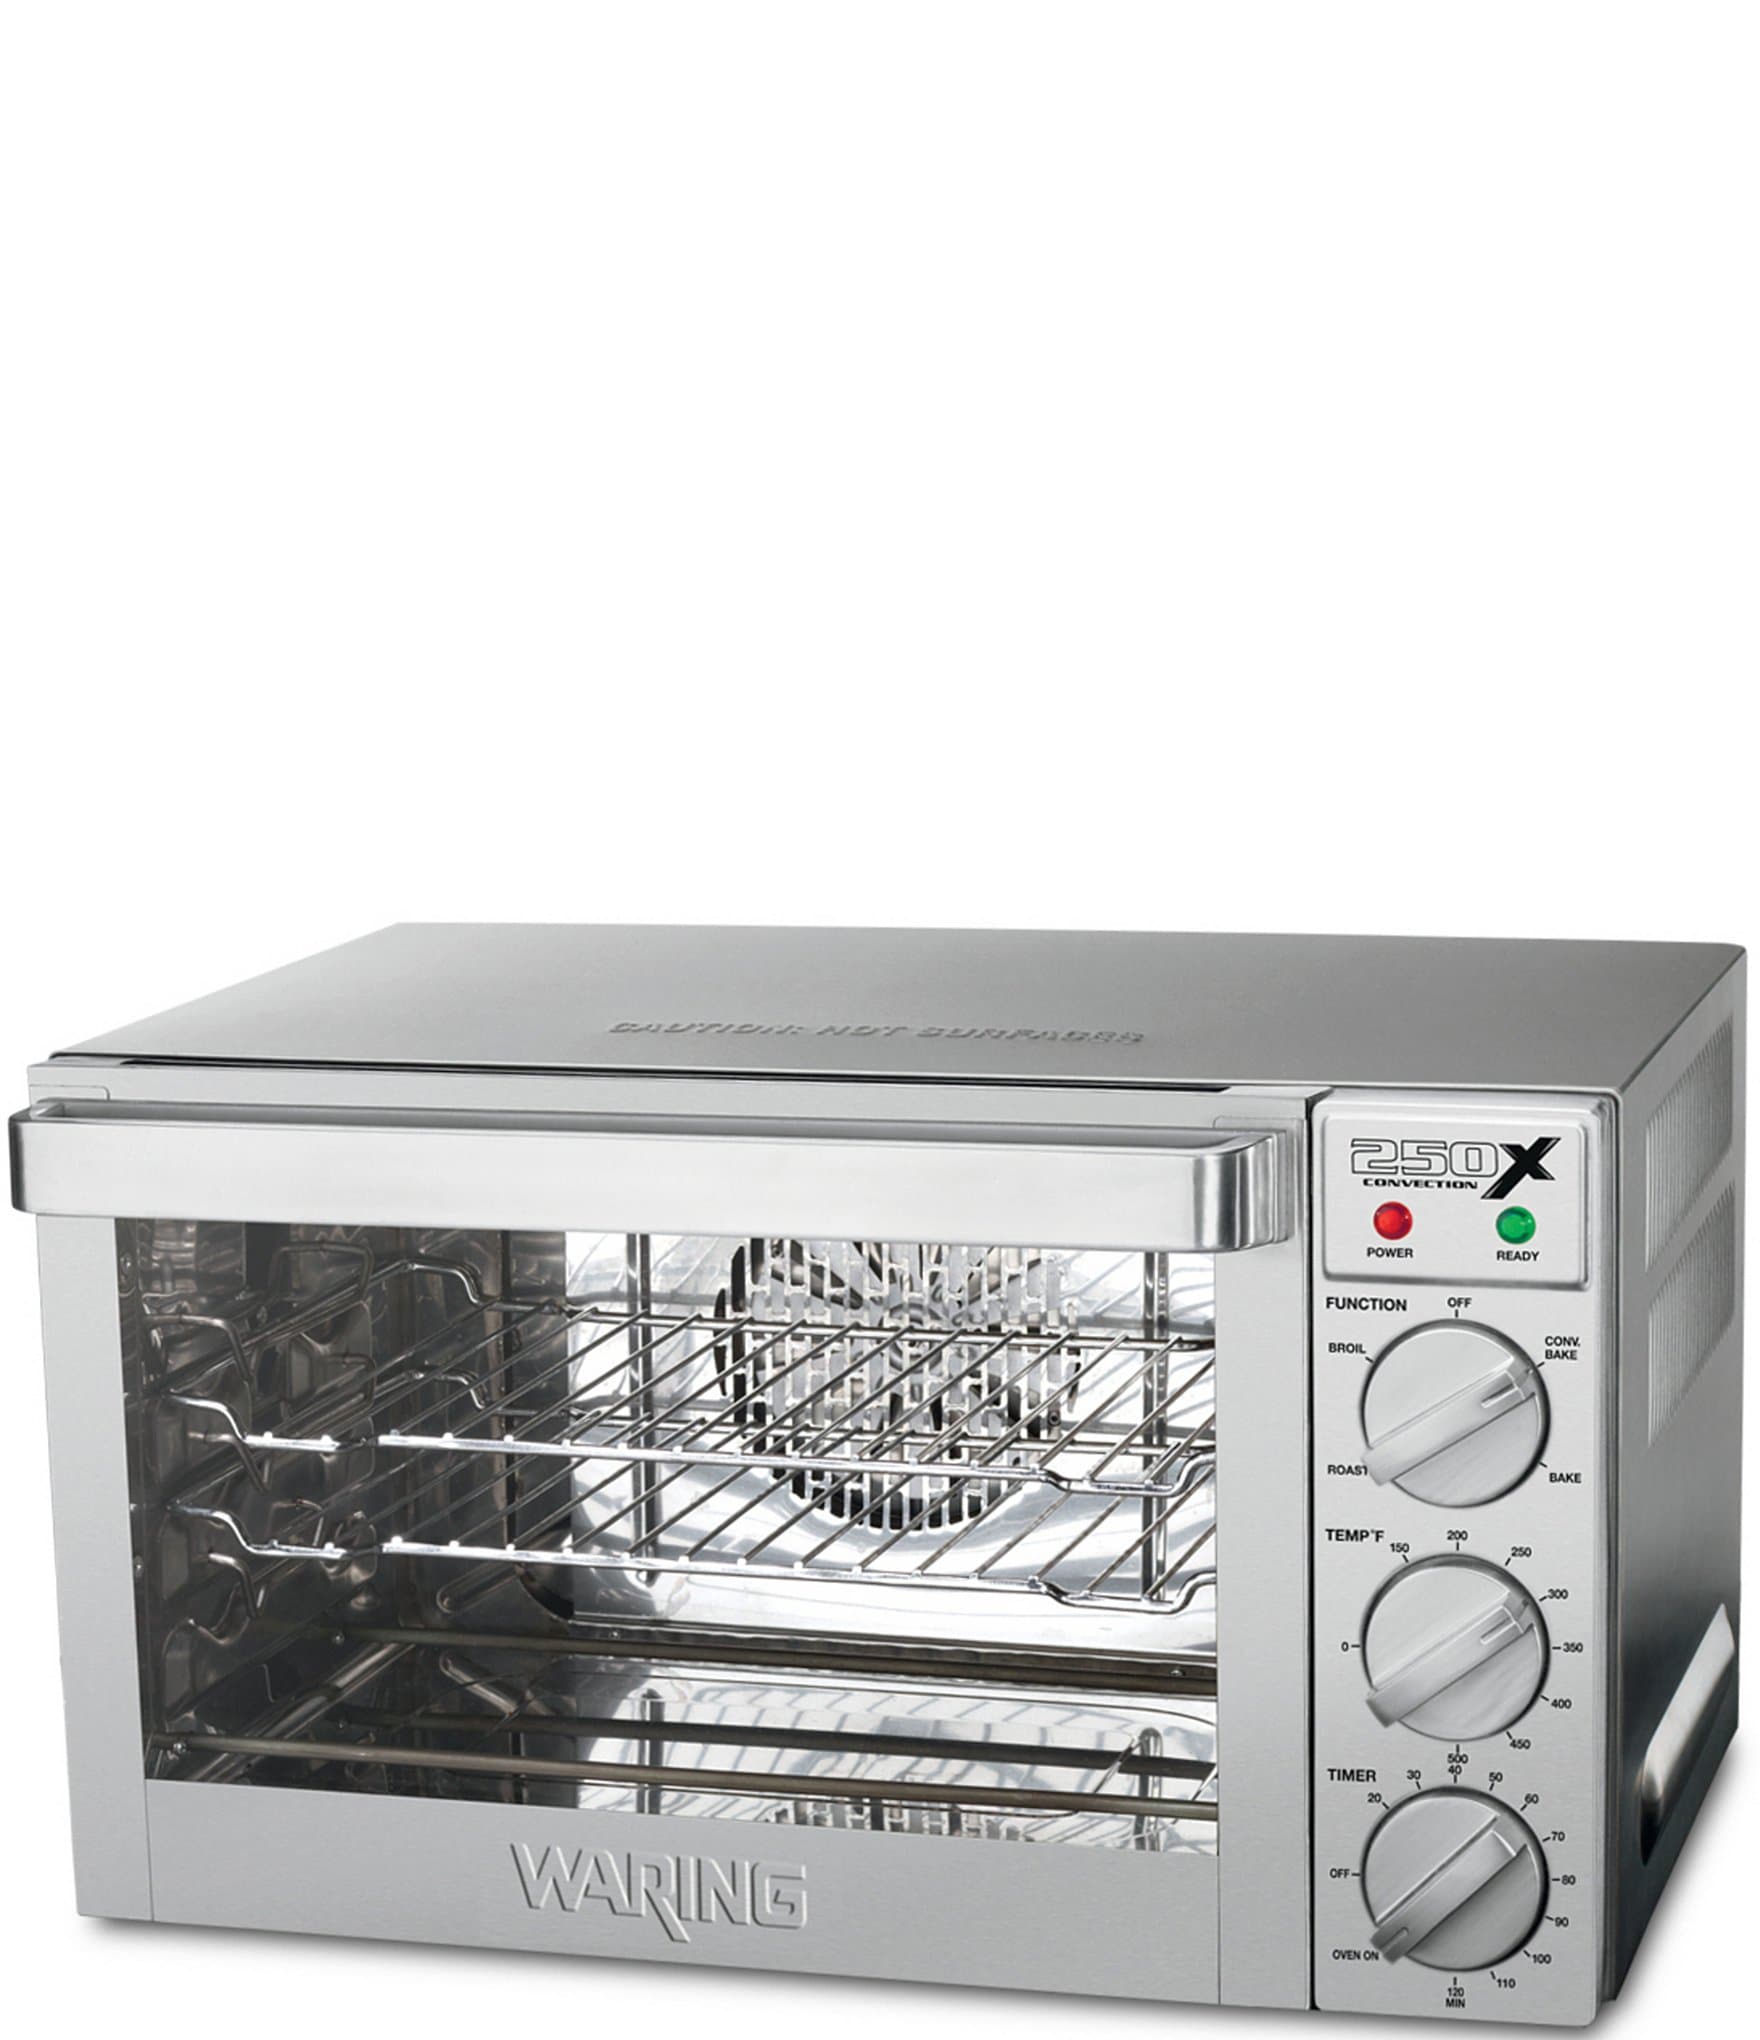 Waring - WCO250X - Quarter Size Commercial Convection Oven